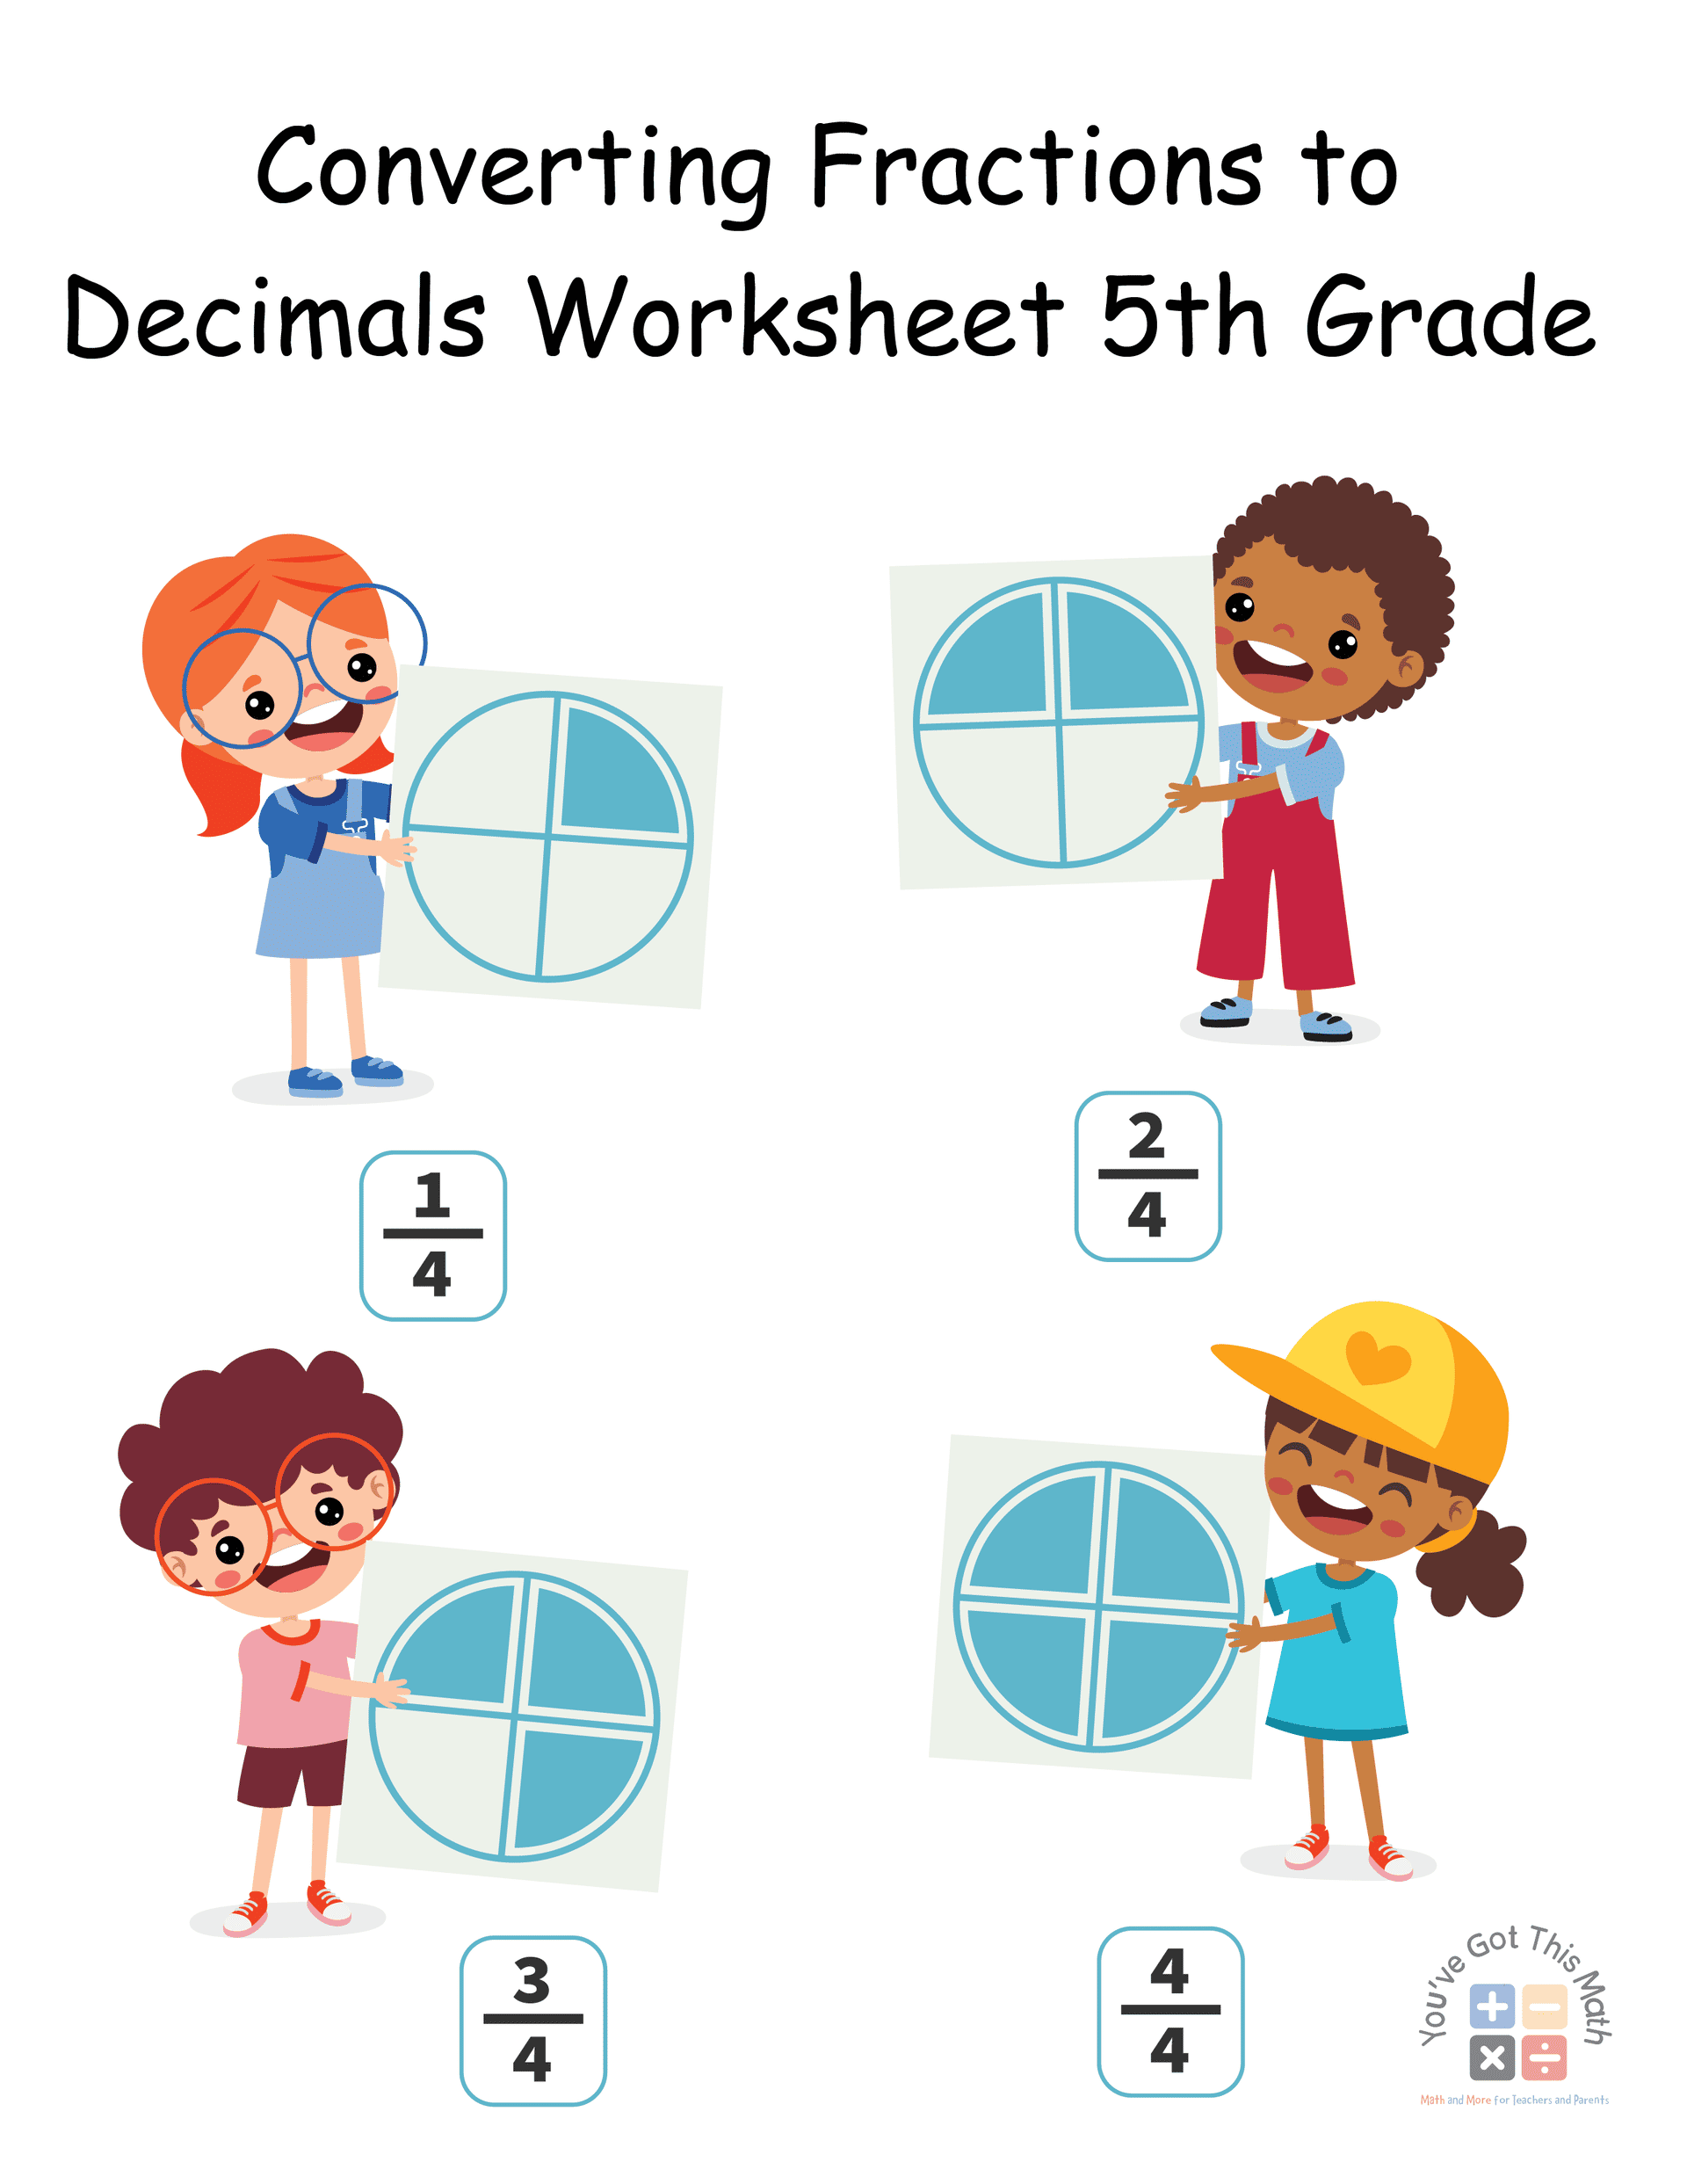 7 Free Converting Fractions to Decimals Worksheet 5th Grade